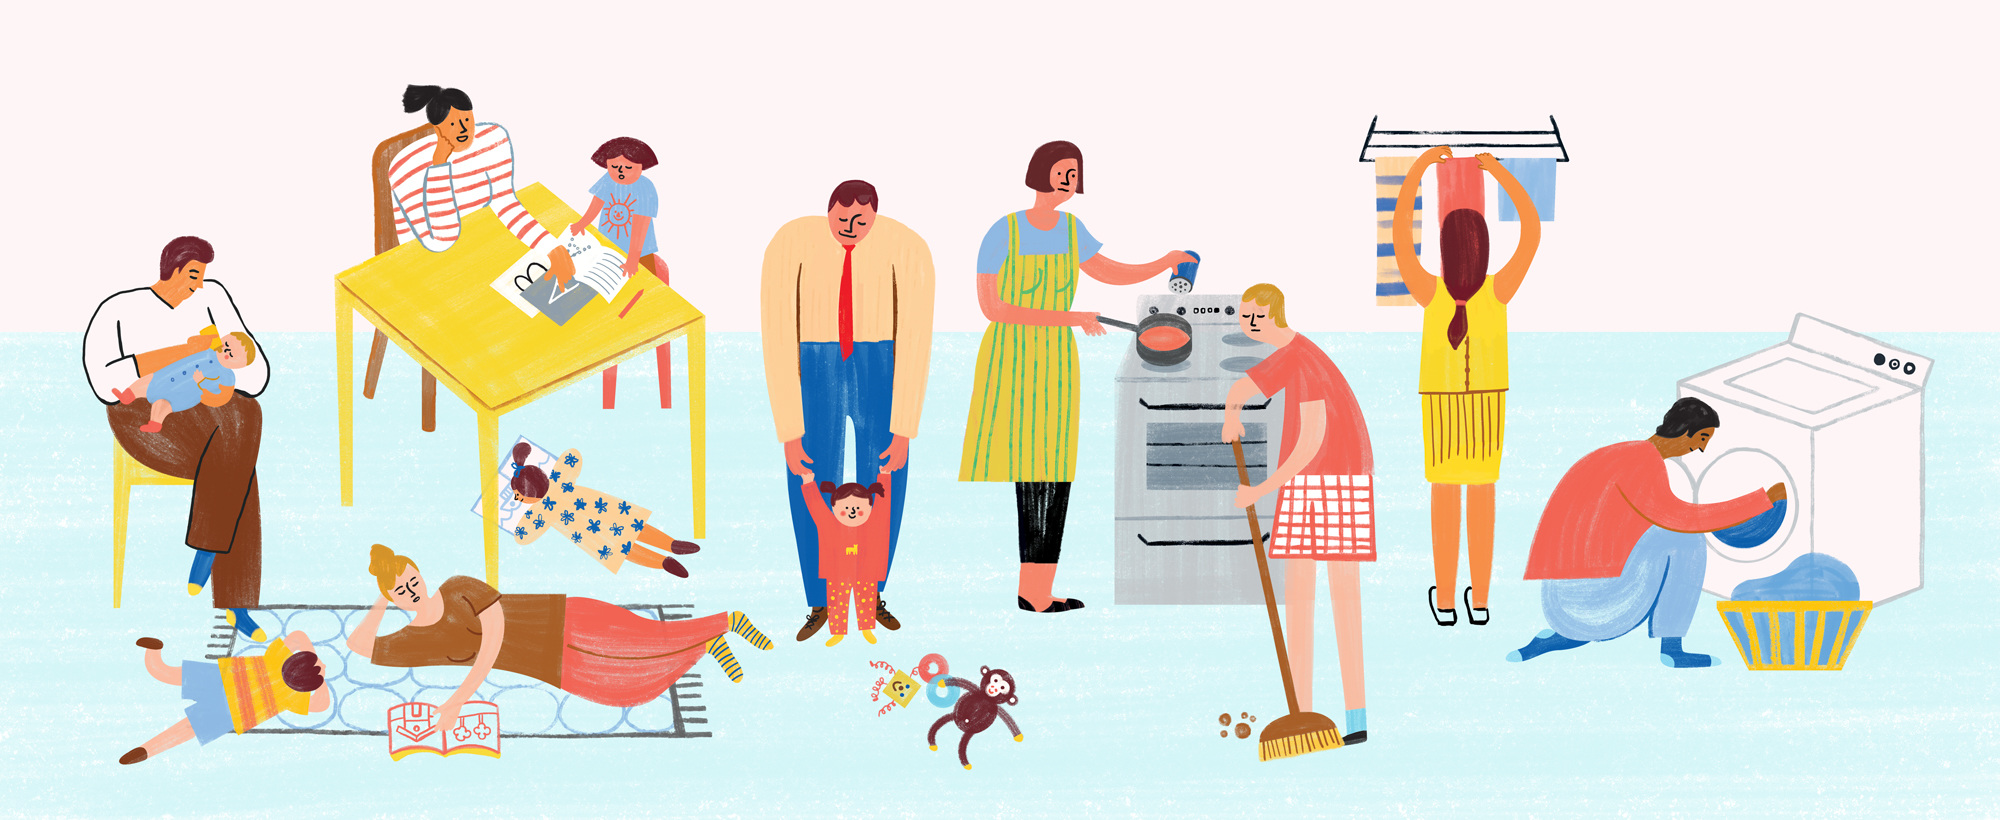 Illustration of folks doing chores around the house